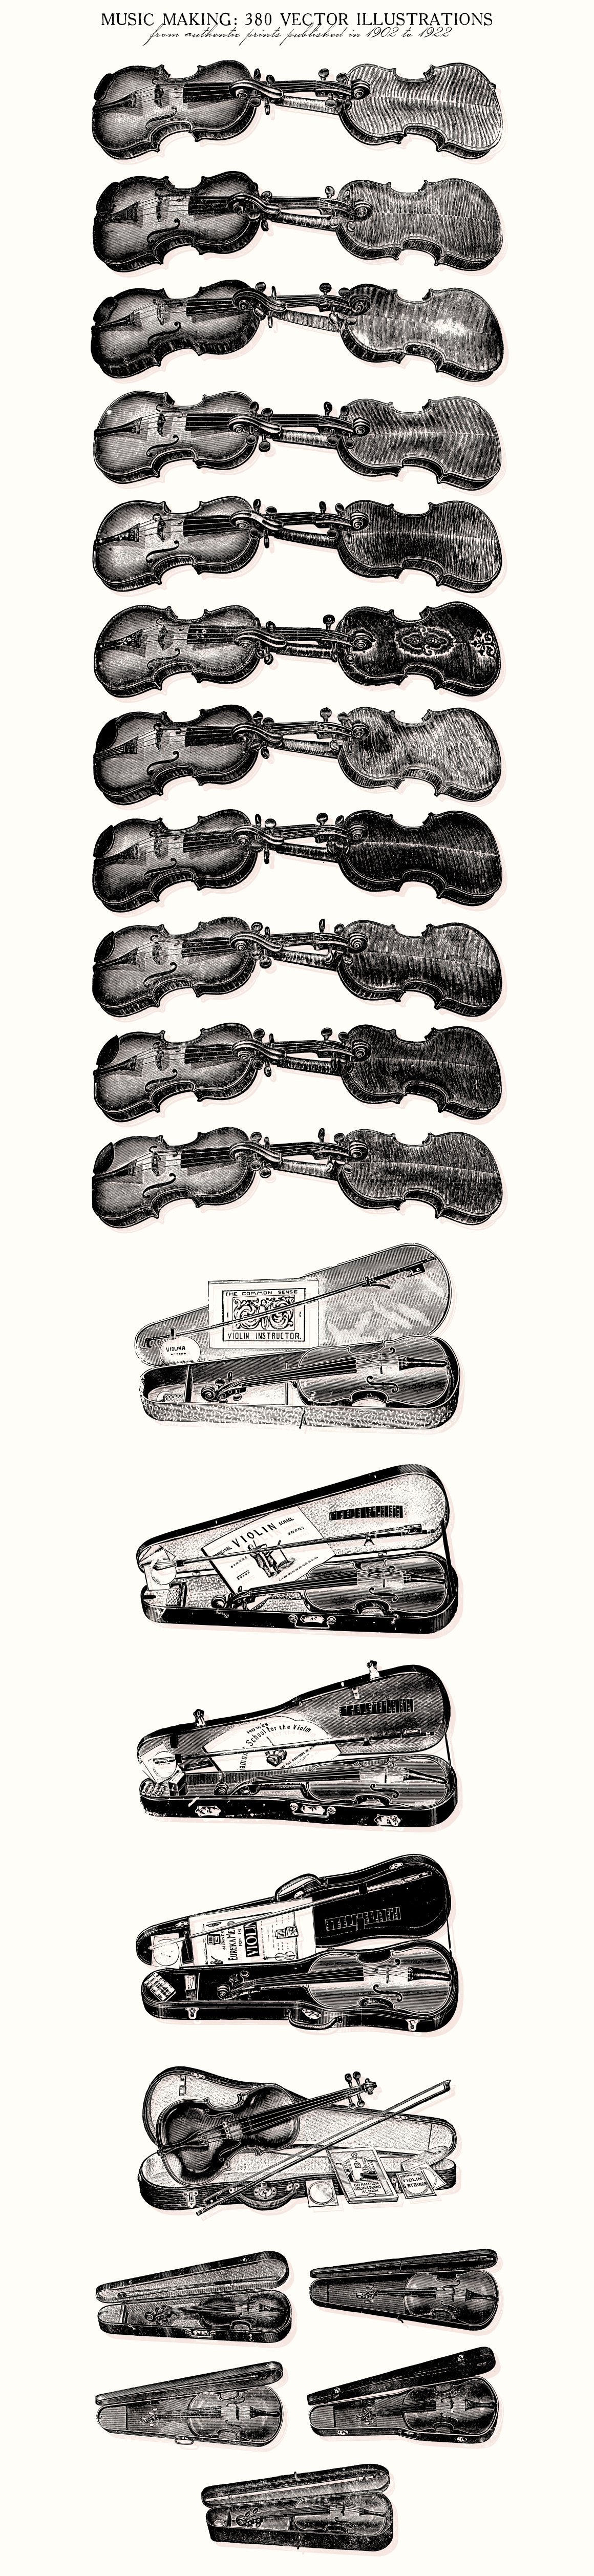 Compilation of irresistible images of vintage musical instruments.